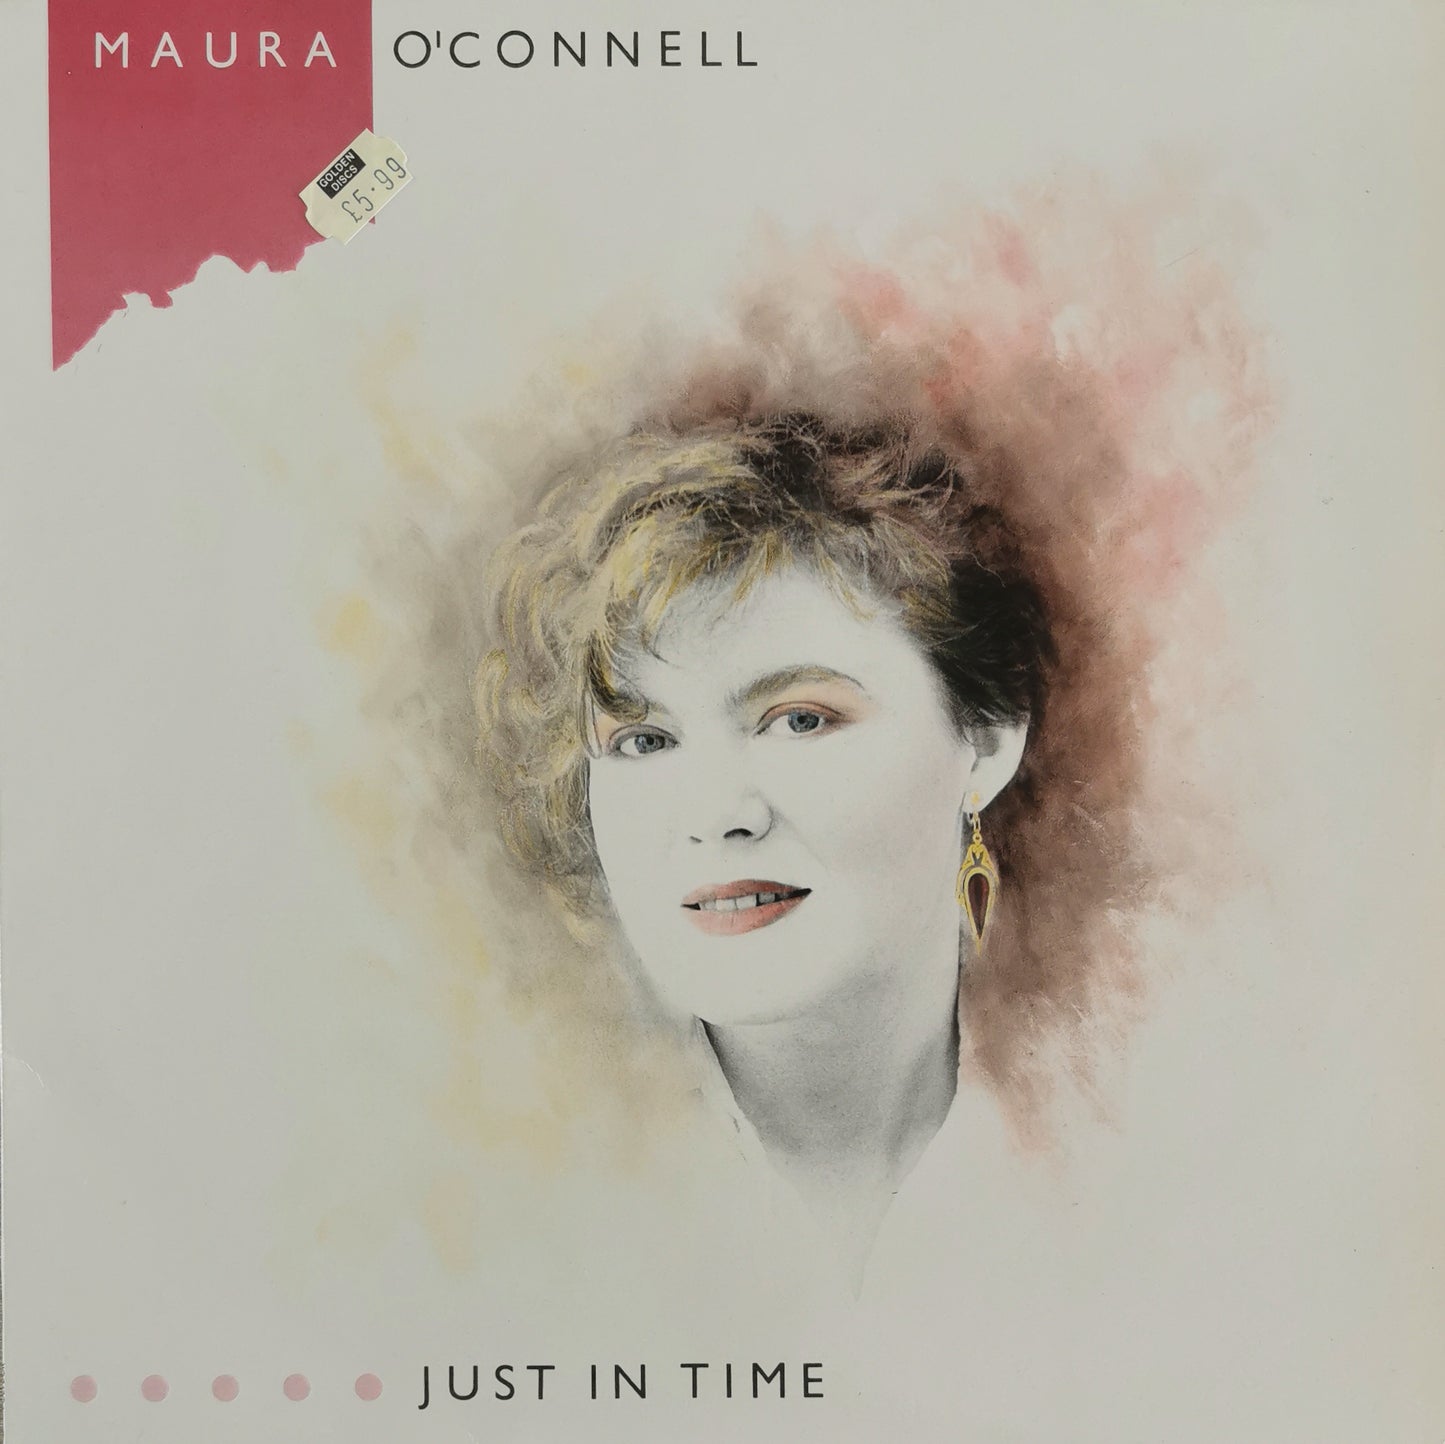 MAURA O'CONNELL - Just In Time